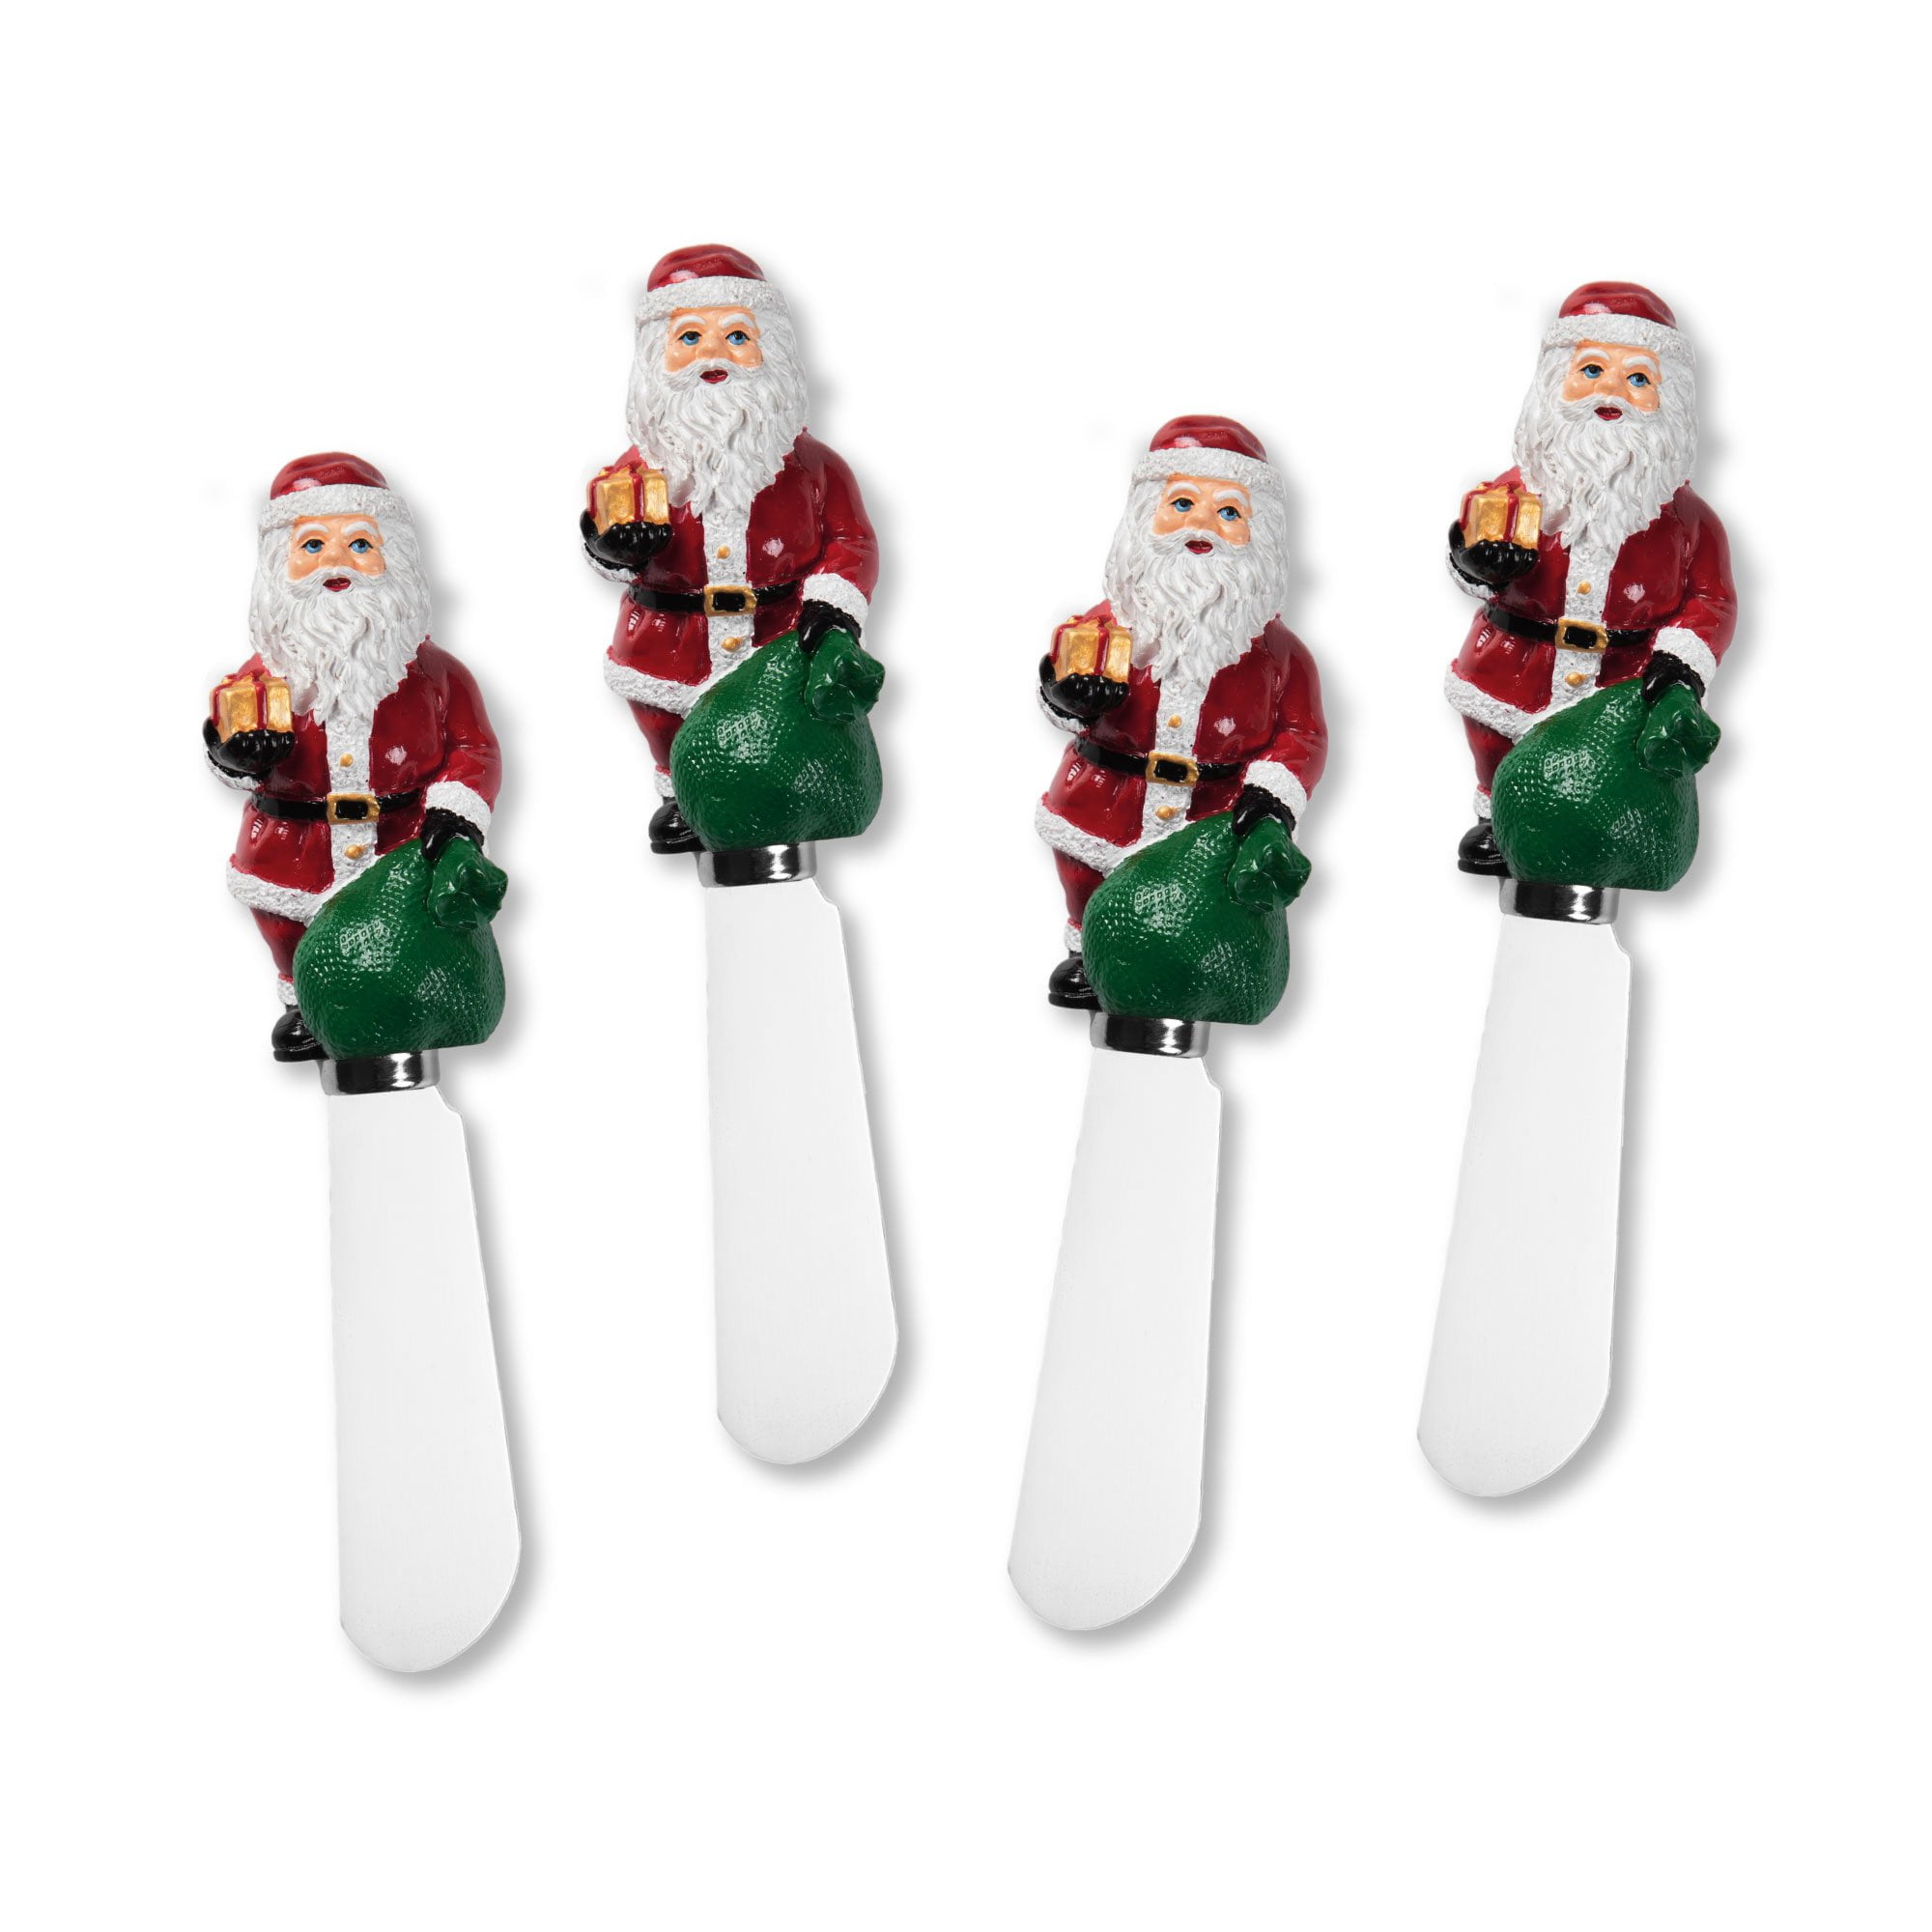 Xmas Party Mr Christmas and Everyday Use for Cheese Lover Spreader 4-Piece Holy Hand Painted Resin Handle with Stainless Steel Blade Cheese Spreader 